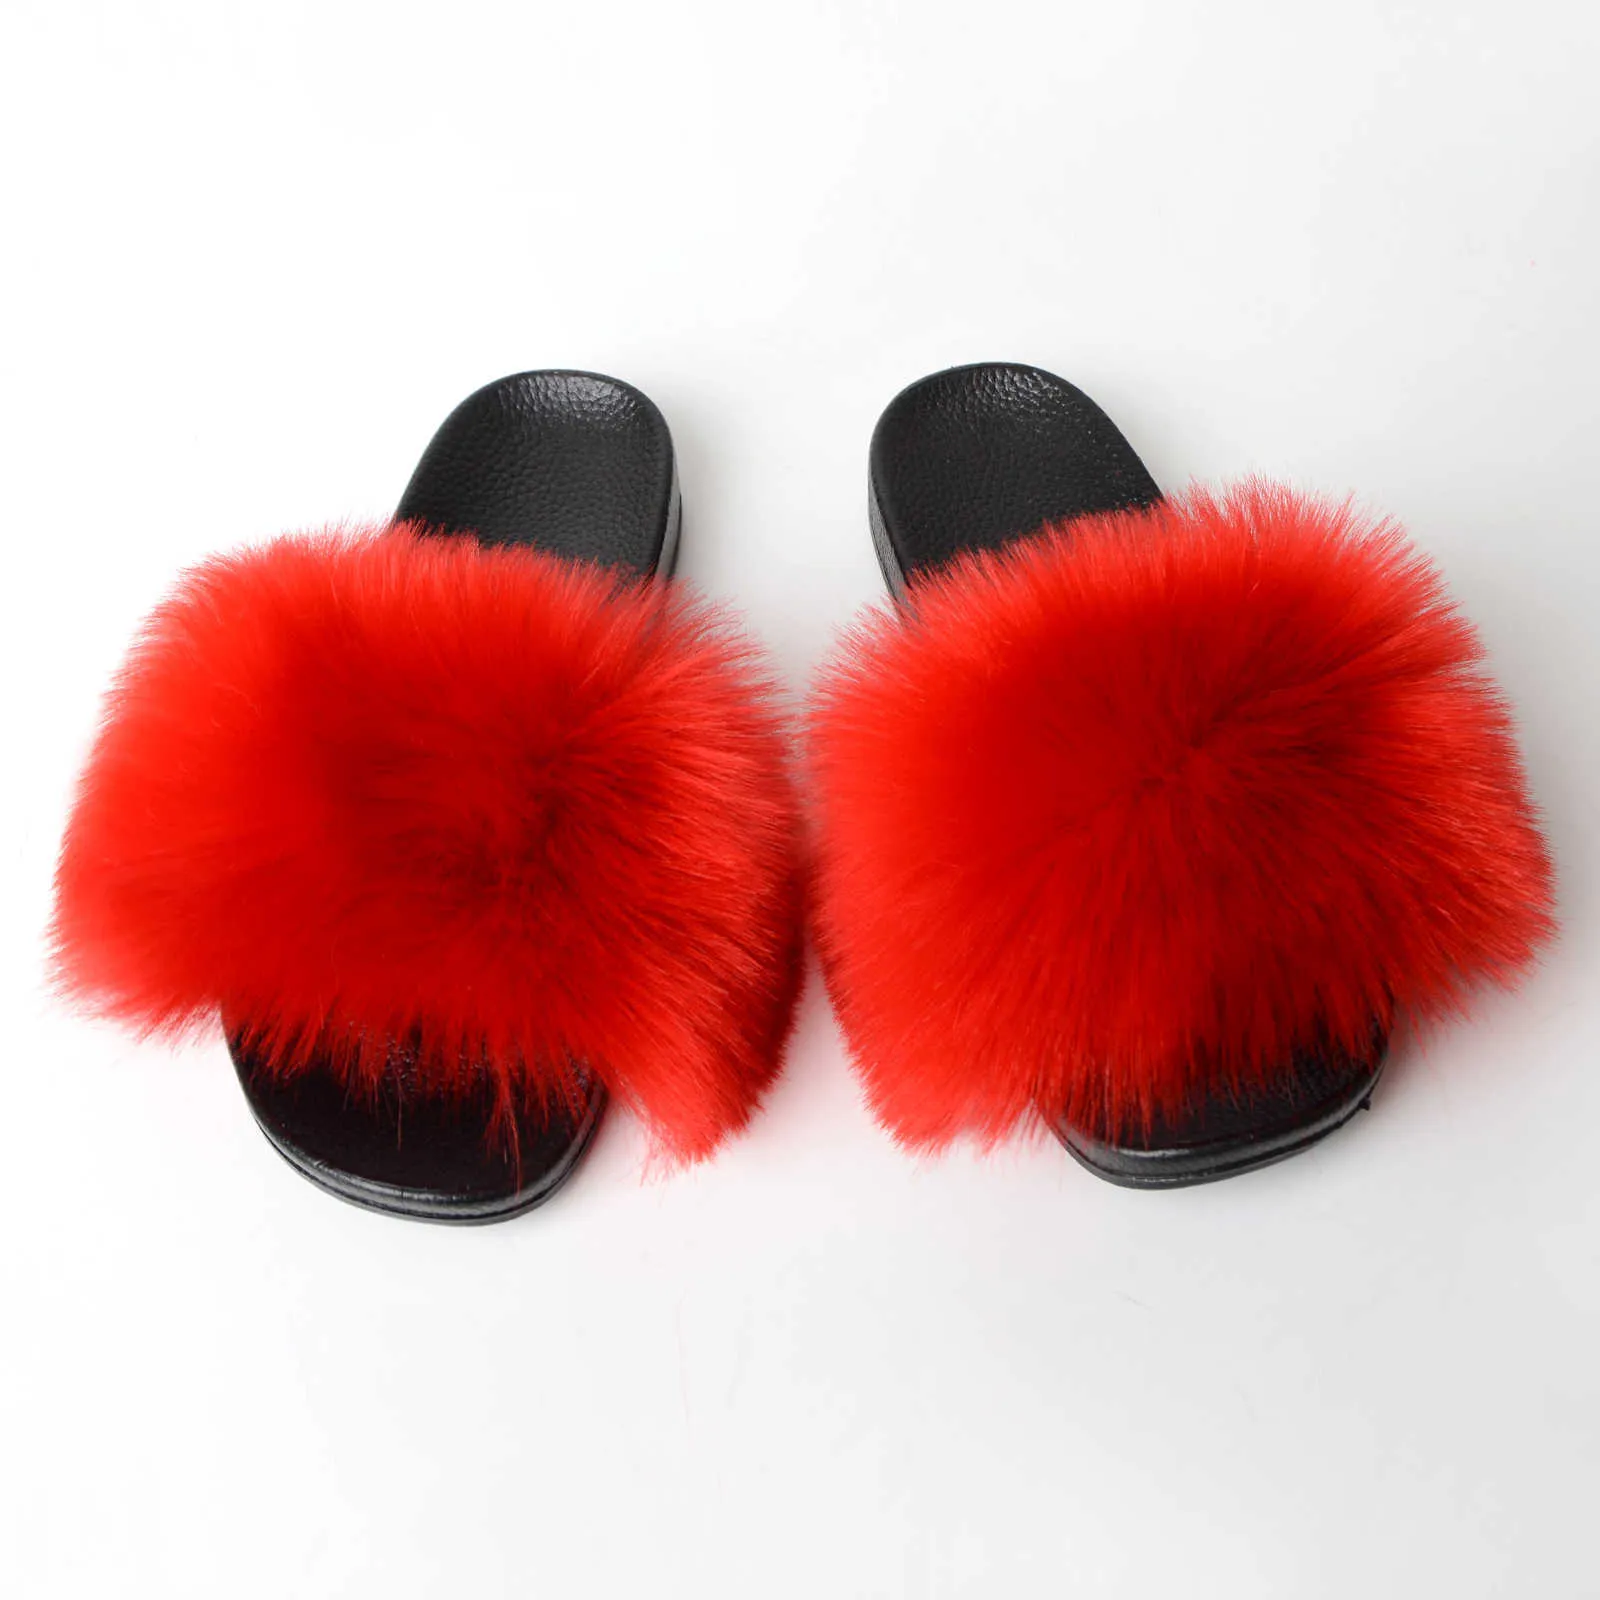 Popchrio Summer Faux Fur Slides Indoor Furry Slippers for Women Best Plush Fluffy Slippers Flat Sandals Outdoor Raccoon Q0508